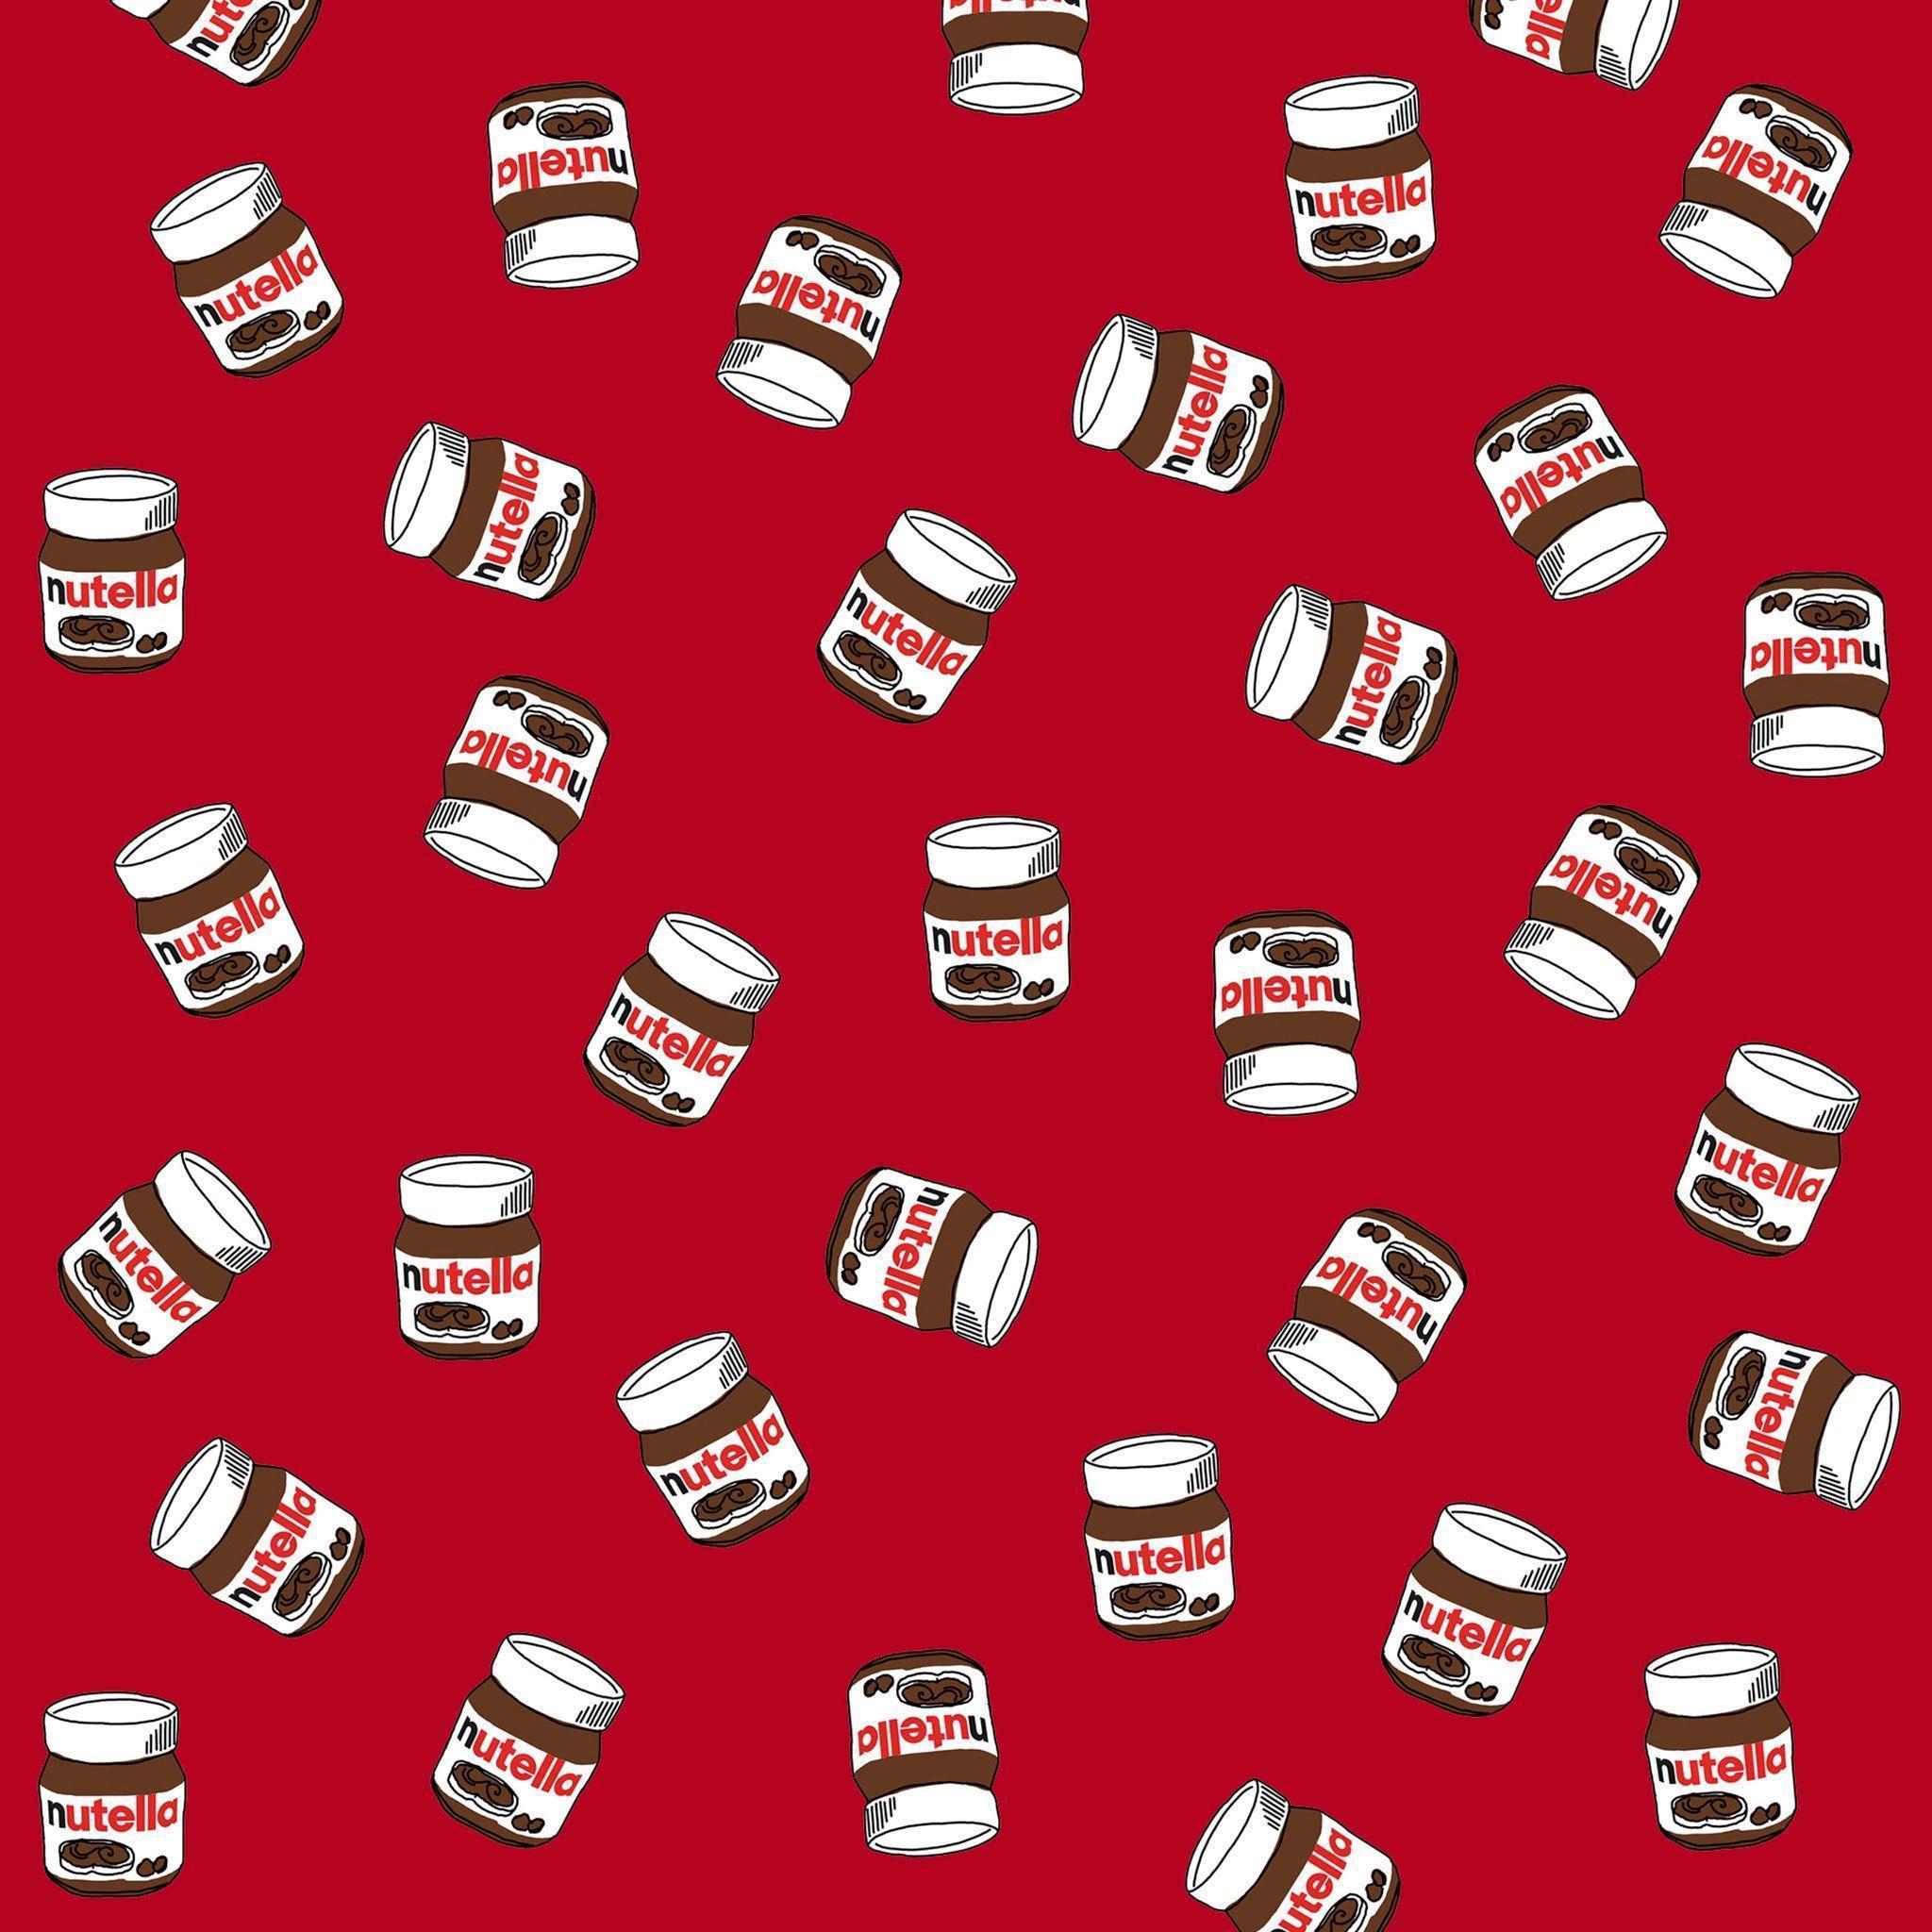 Nutella Wallpaper. WALPAPERS. Nutella and Wallpaper